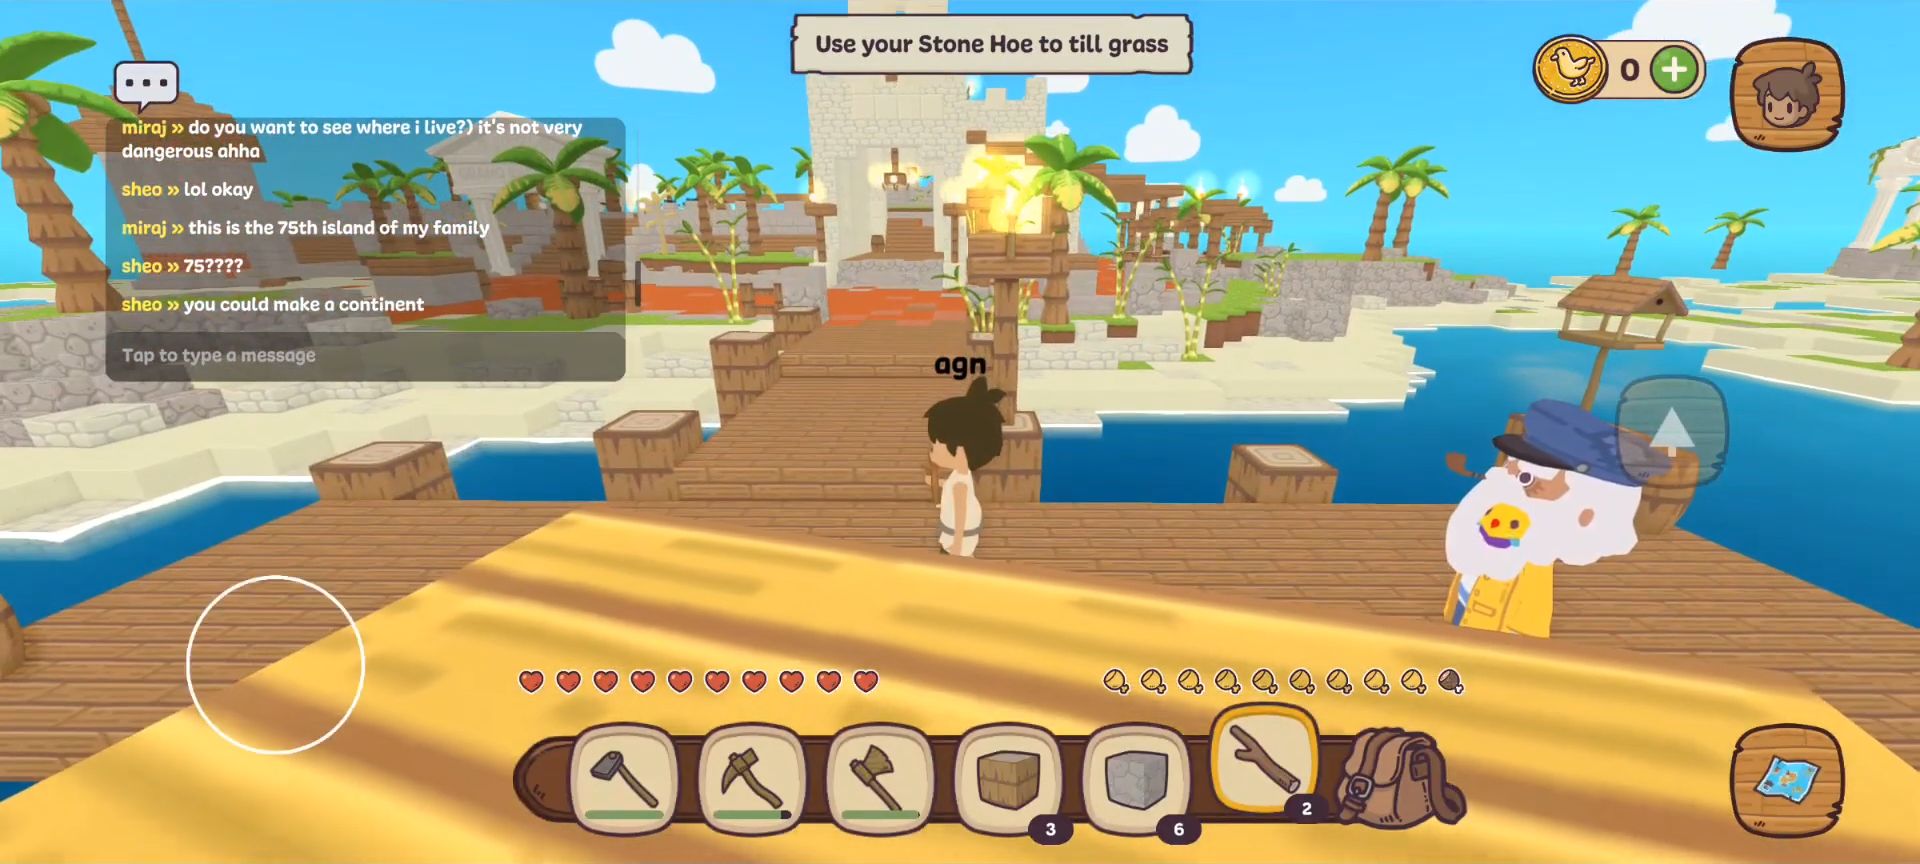 Mairaj Gaming Roblox Mod APK Download Latest for Android in 2023